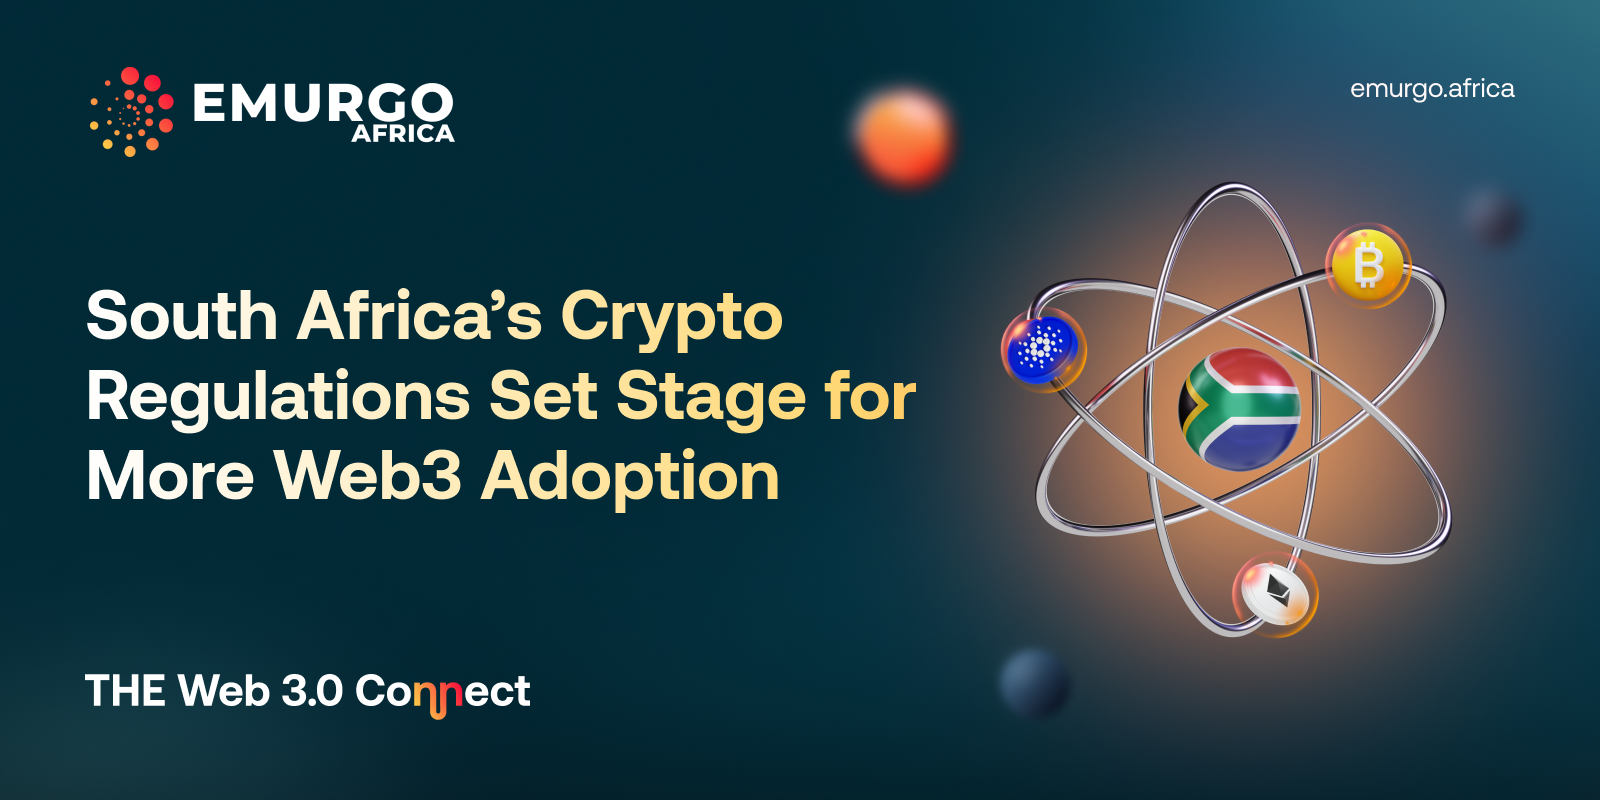 South Africa’s Crypto Regulations Set Stage for More Web3 Adoption